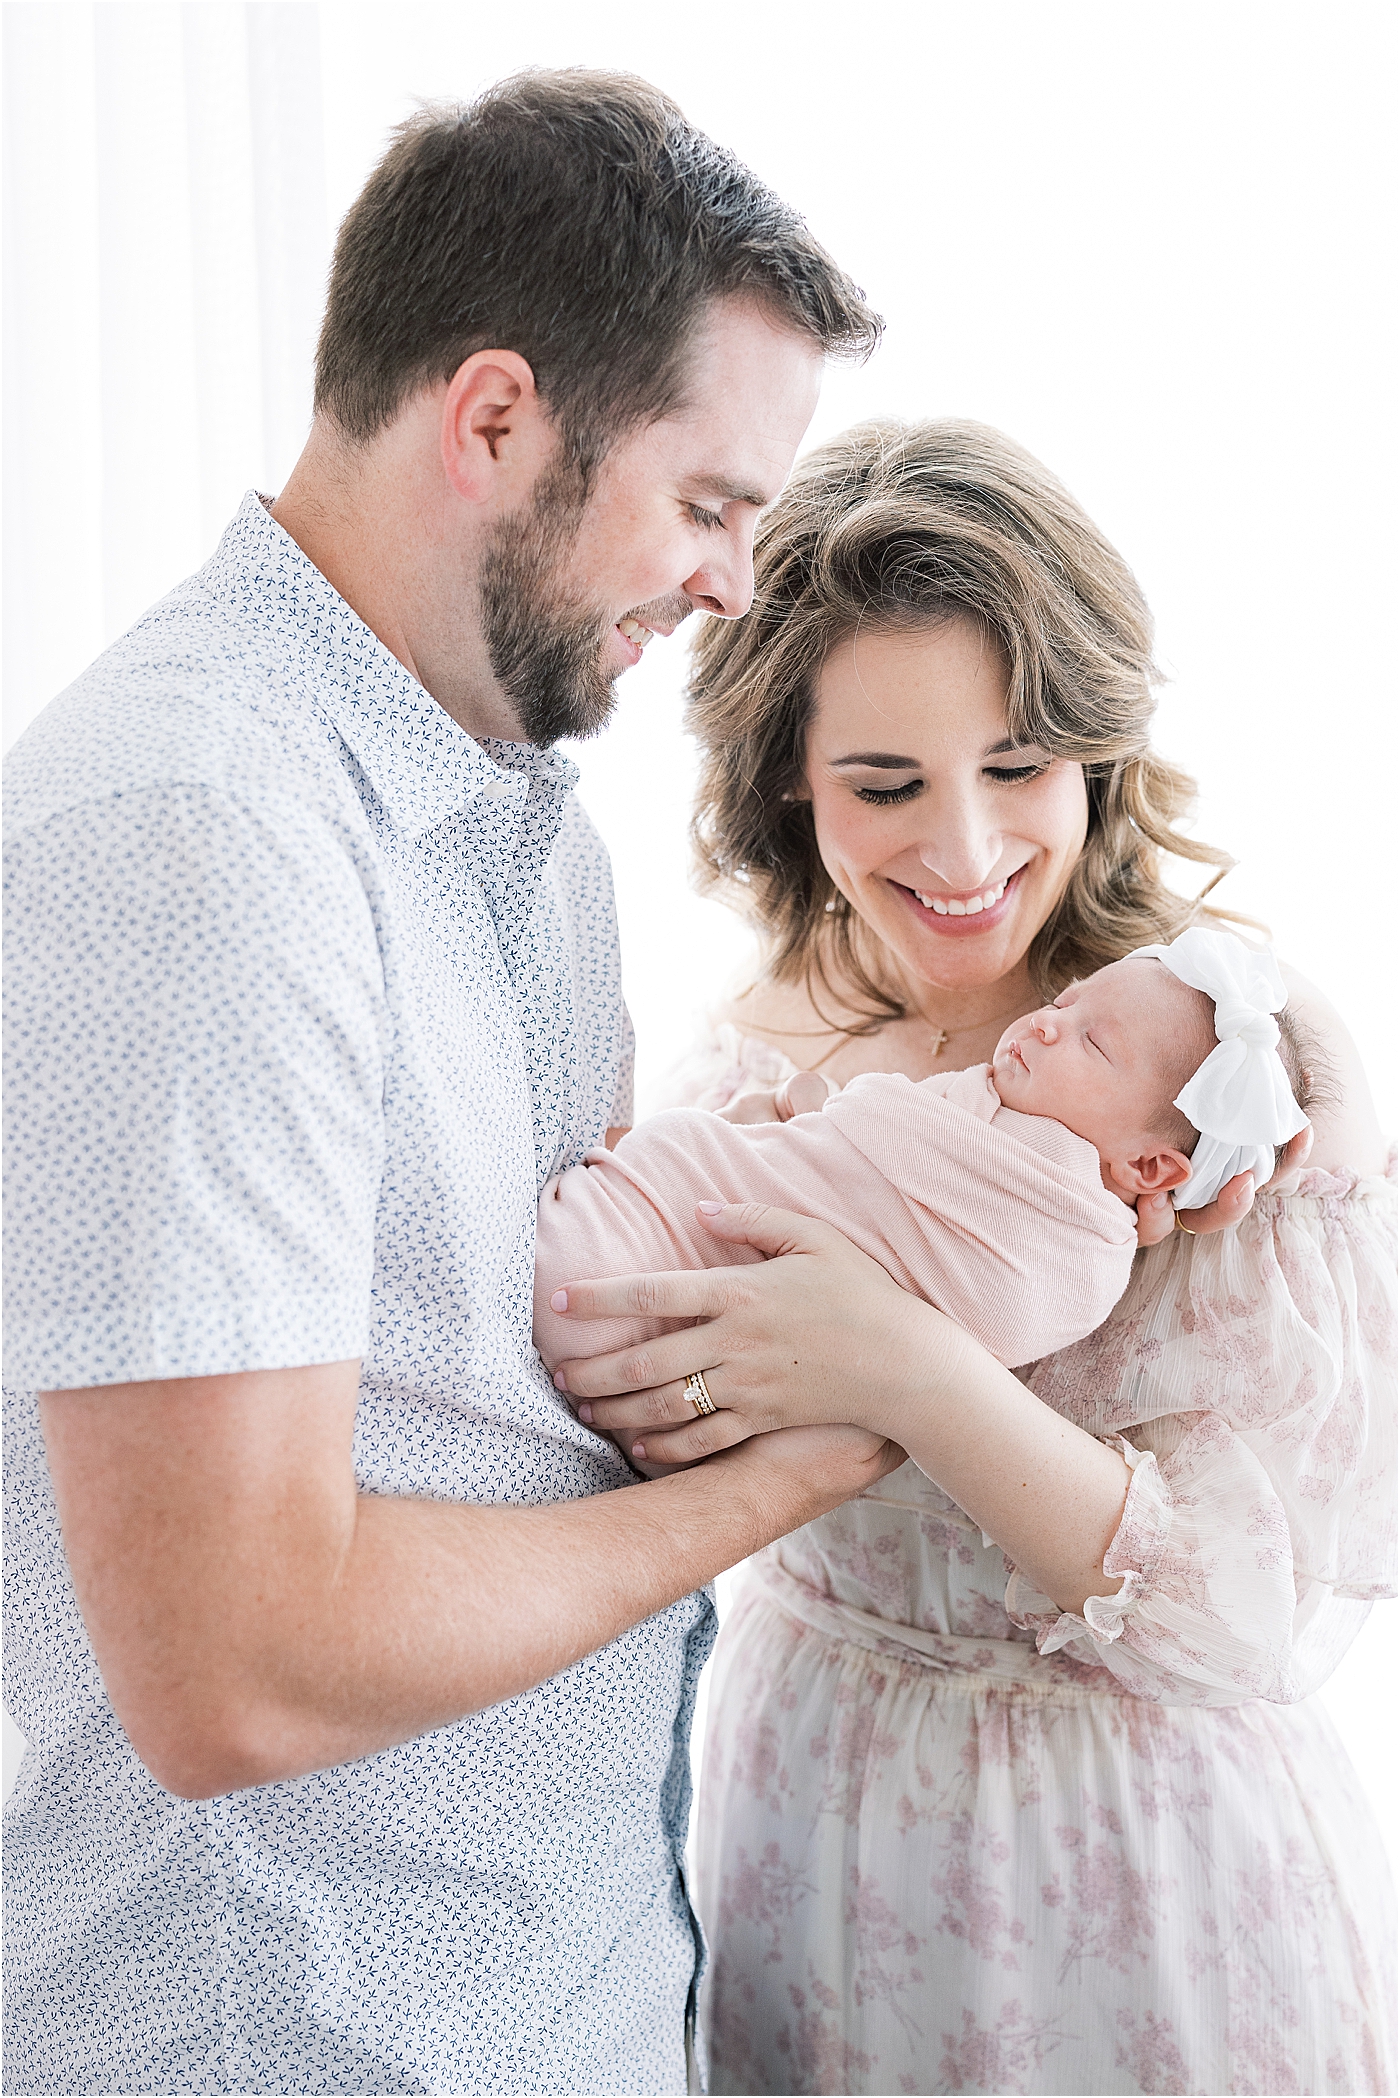 New parents holding their baby girl | Lindsay Konopa Photography